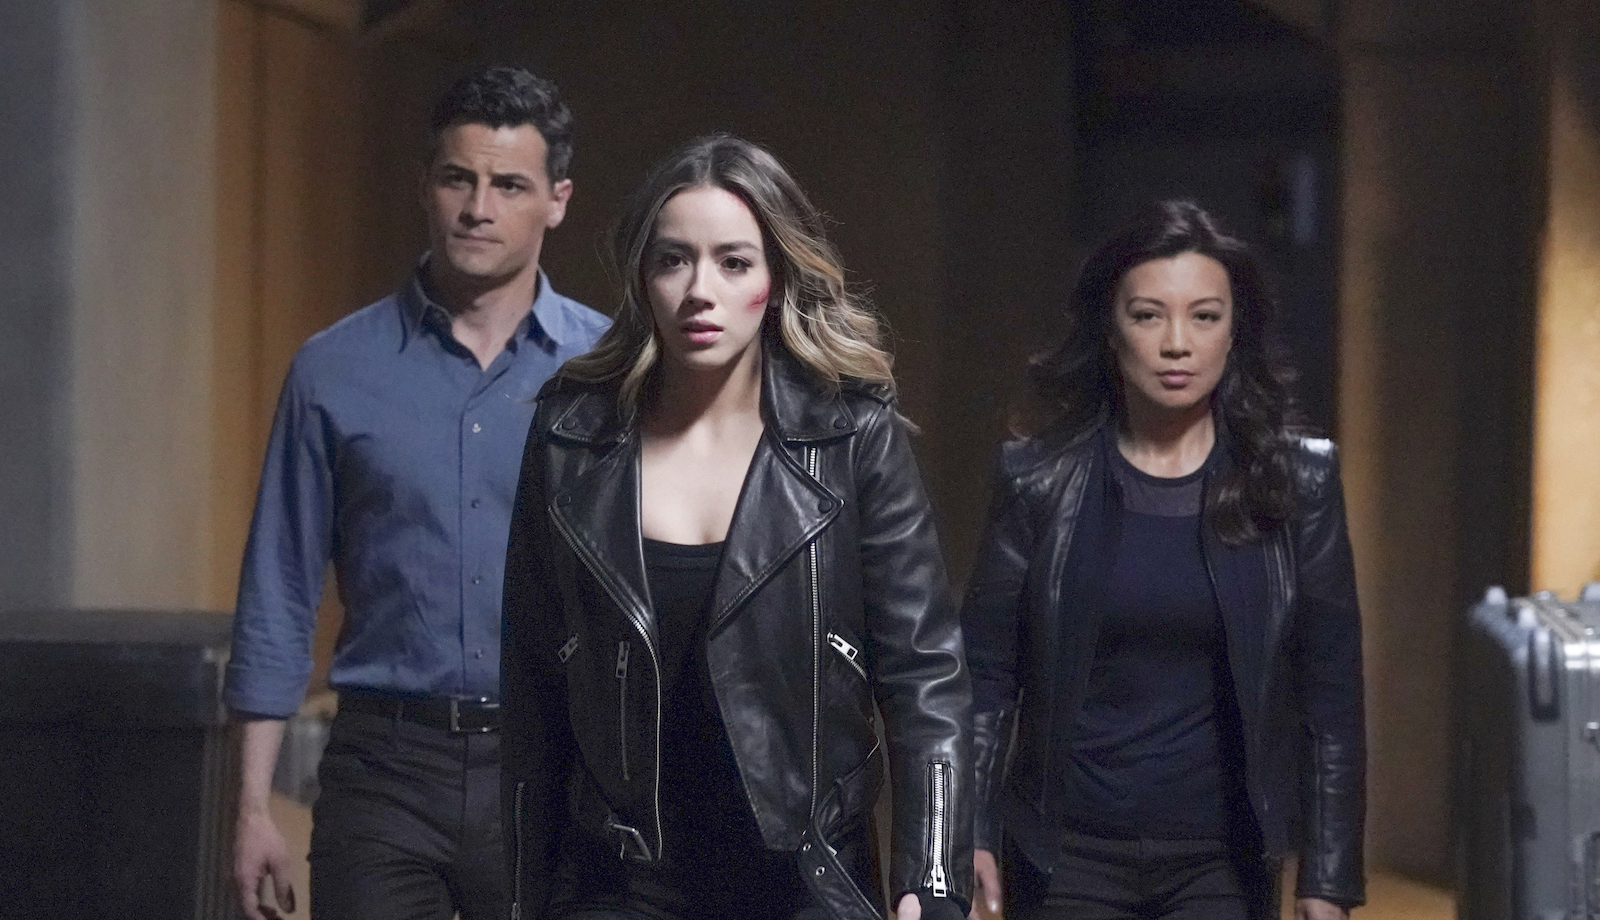 Agents of SHIELD Series Finale Trailer, Release Date, and Synopsis | Den of Geek